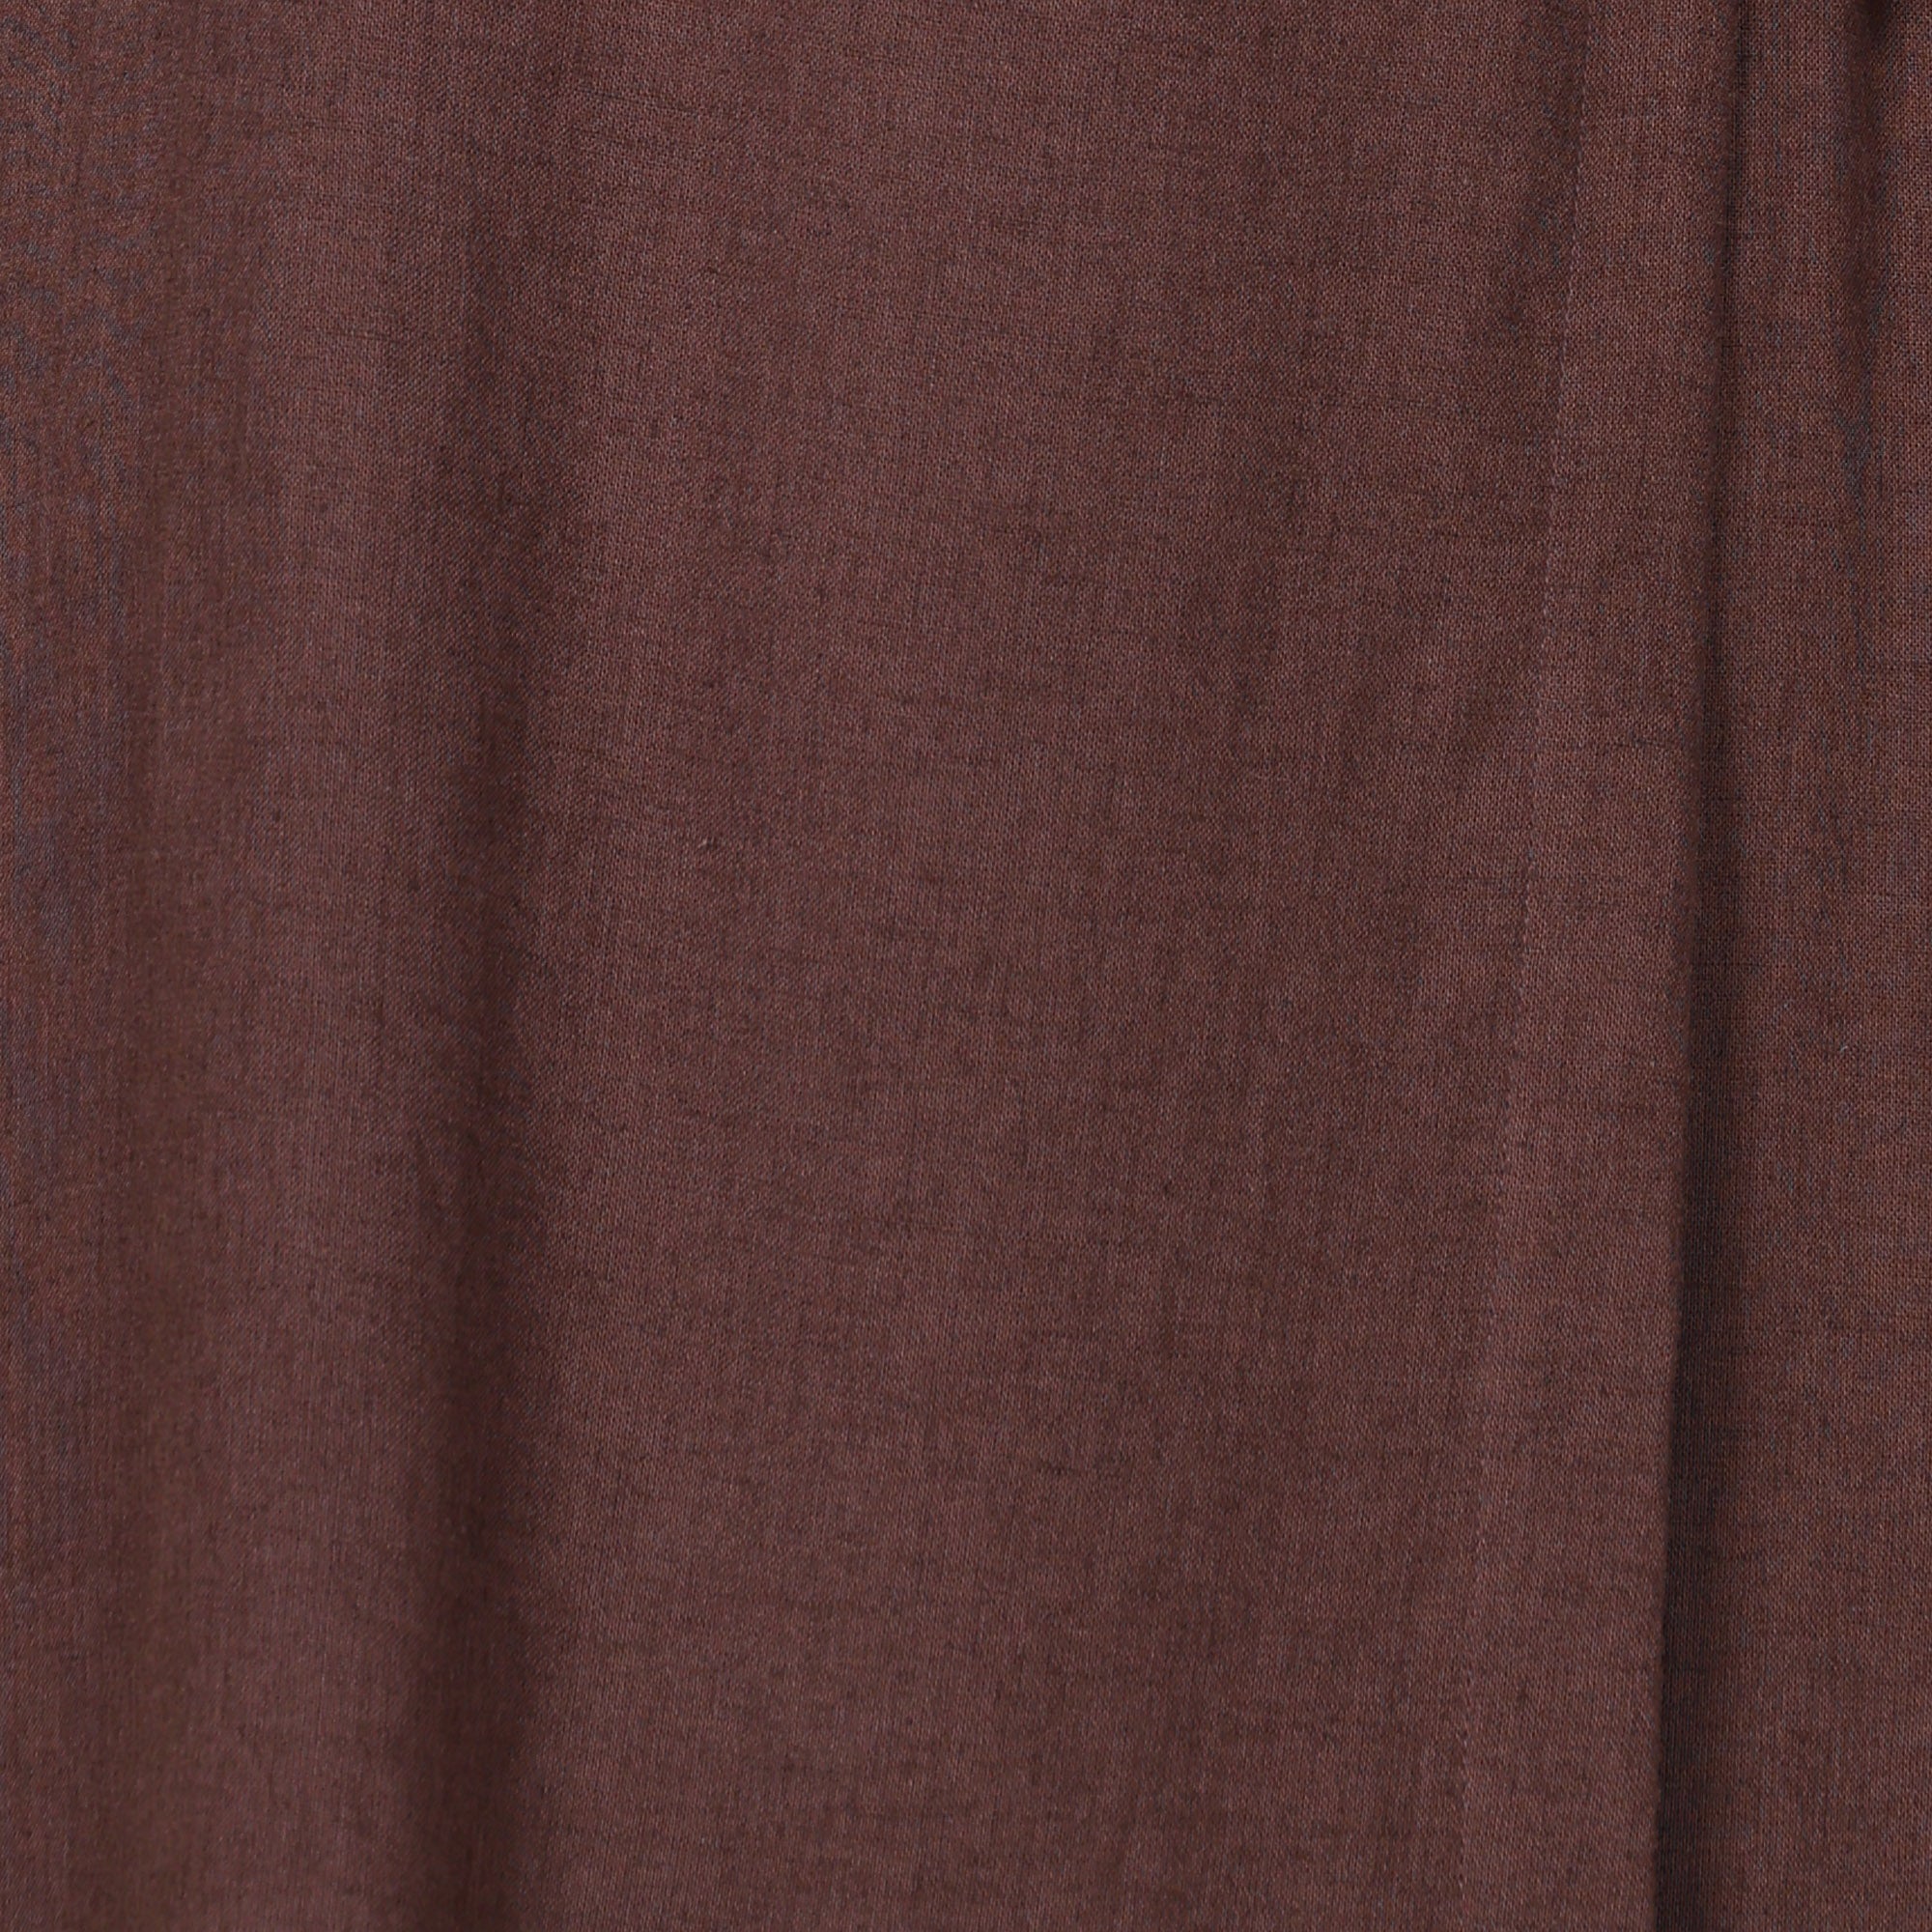 Jessica Shirt - Coffee Brown With Contrast Edging - Limited Edition